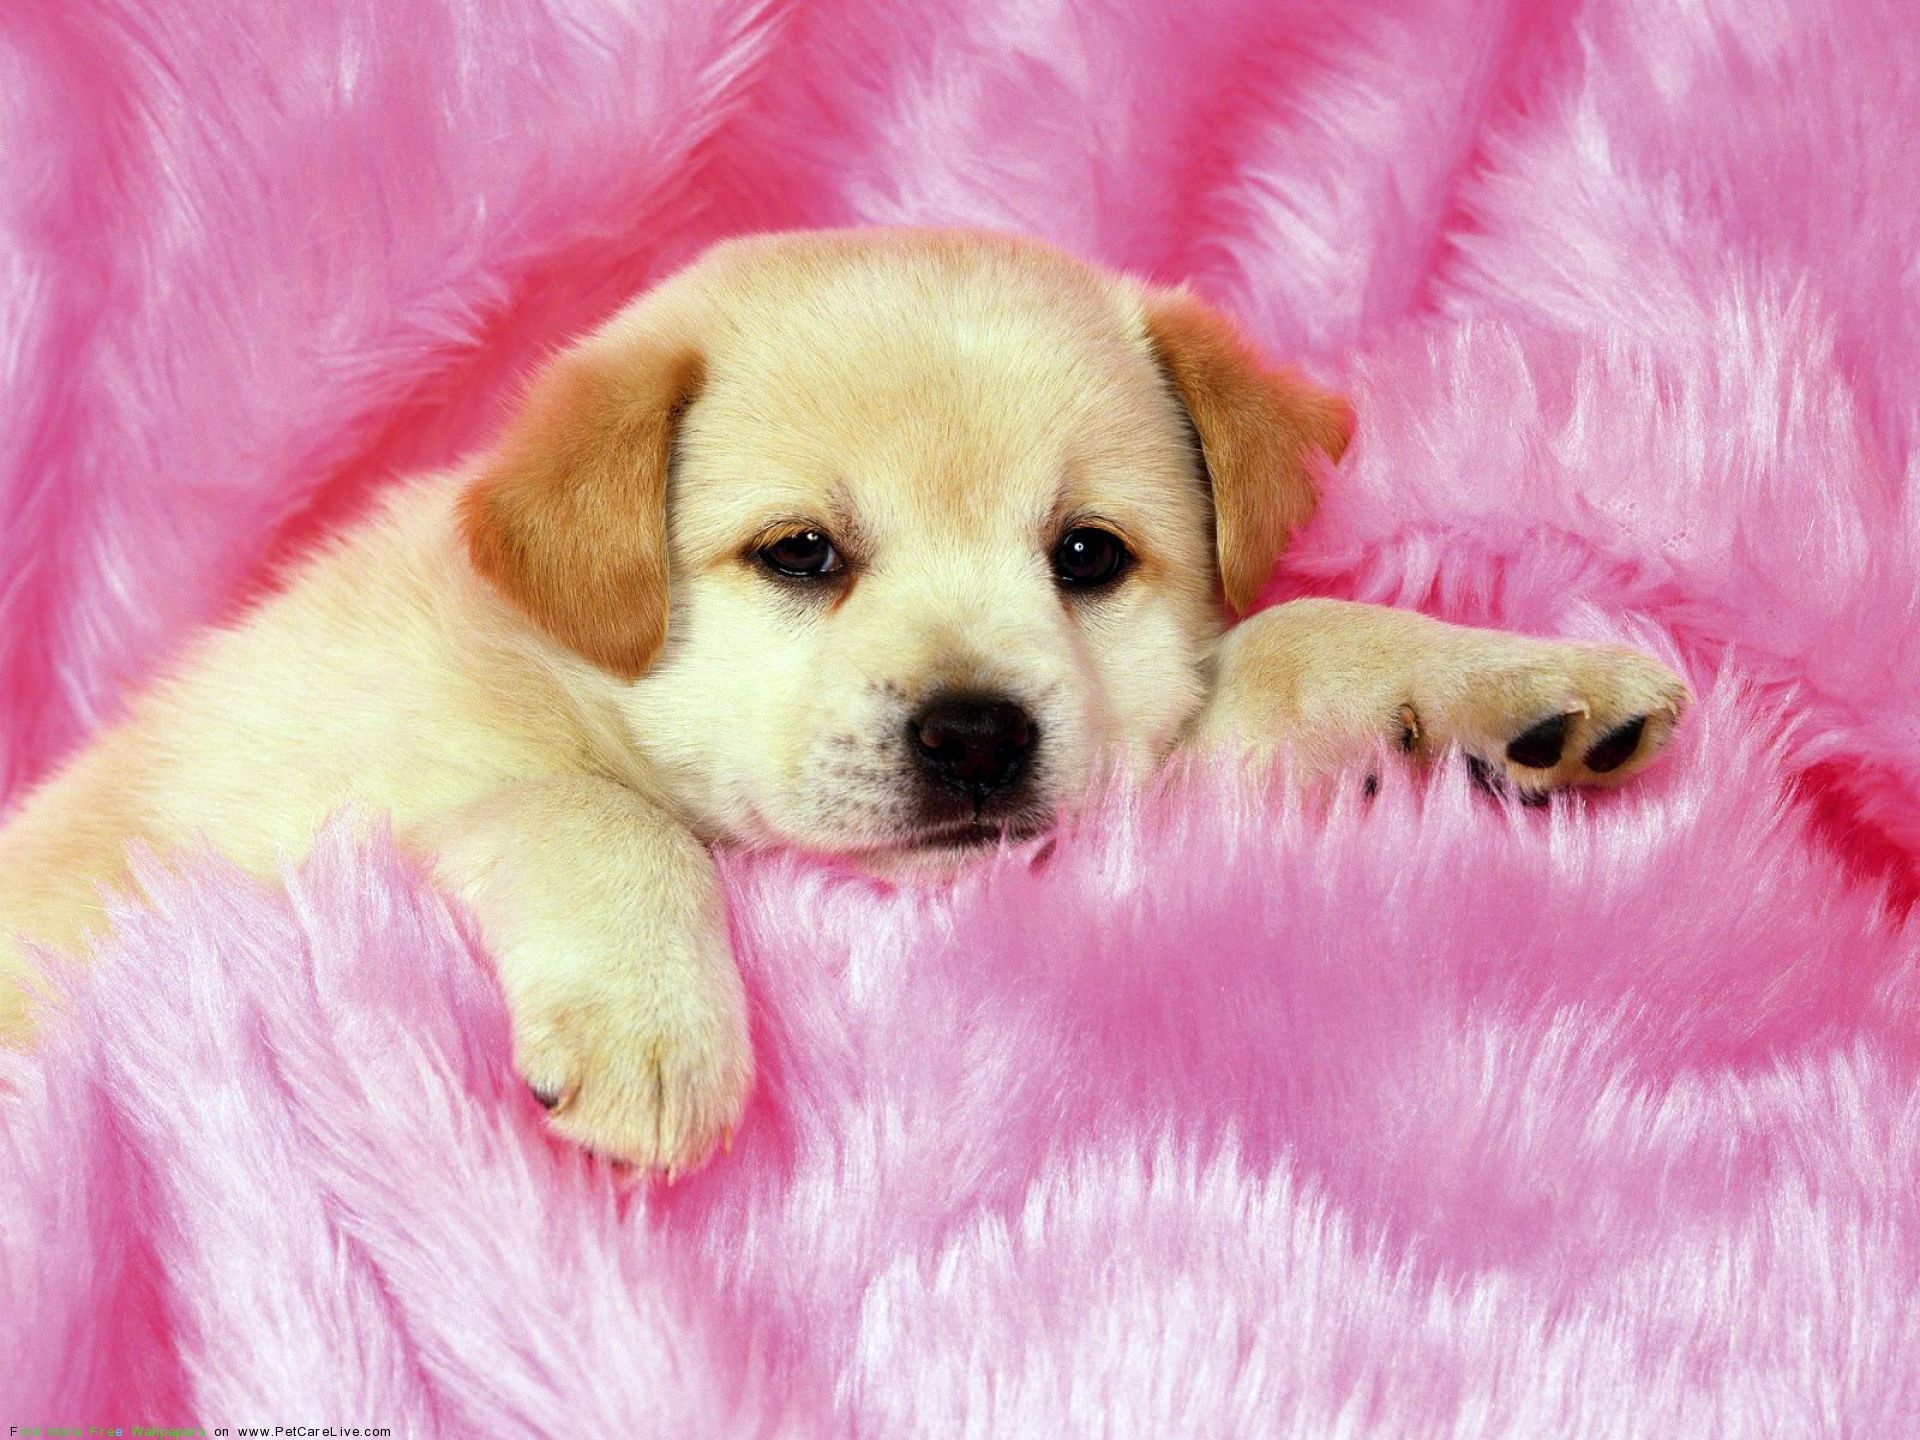 Cute Little Puppys Puppy Picture Widescreen With Small Wallpaper Dogs